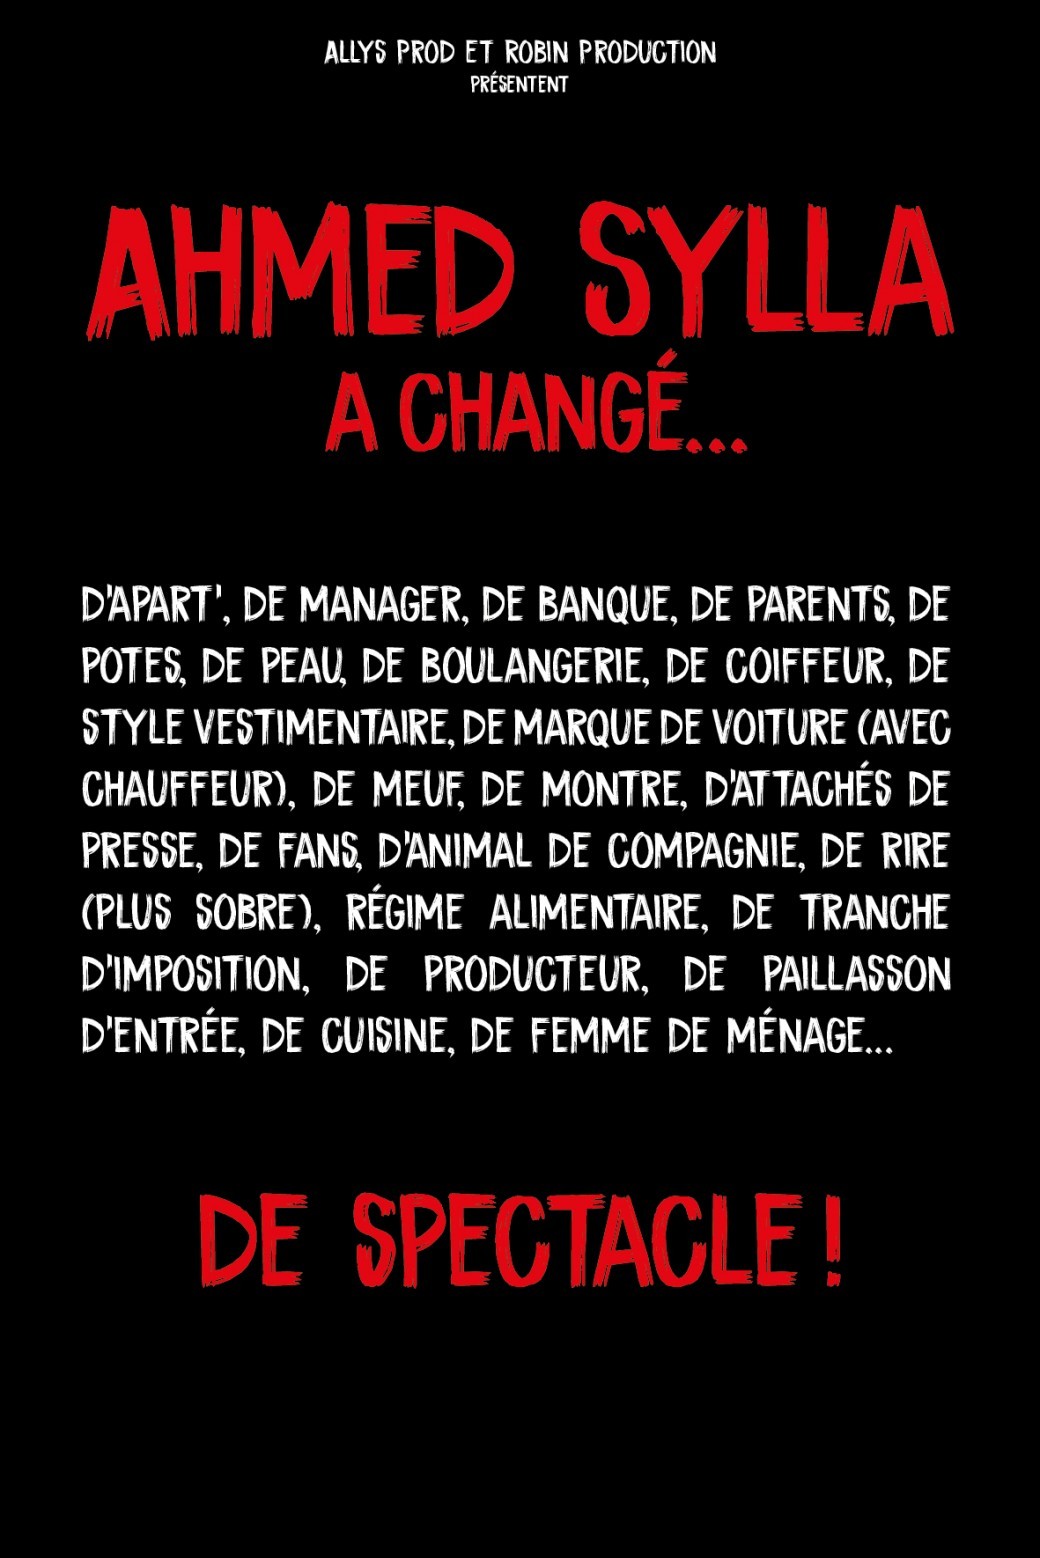 Ahmed Sylla dans "Ahmed a changé... Son spectacle aussi !"